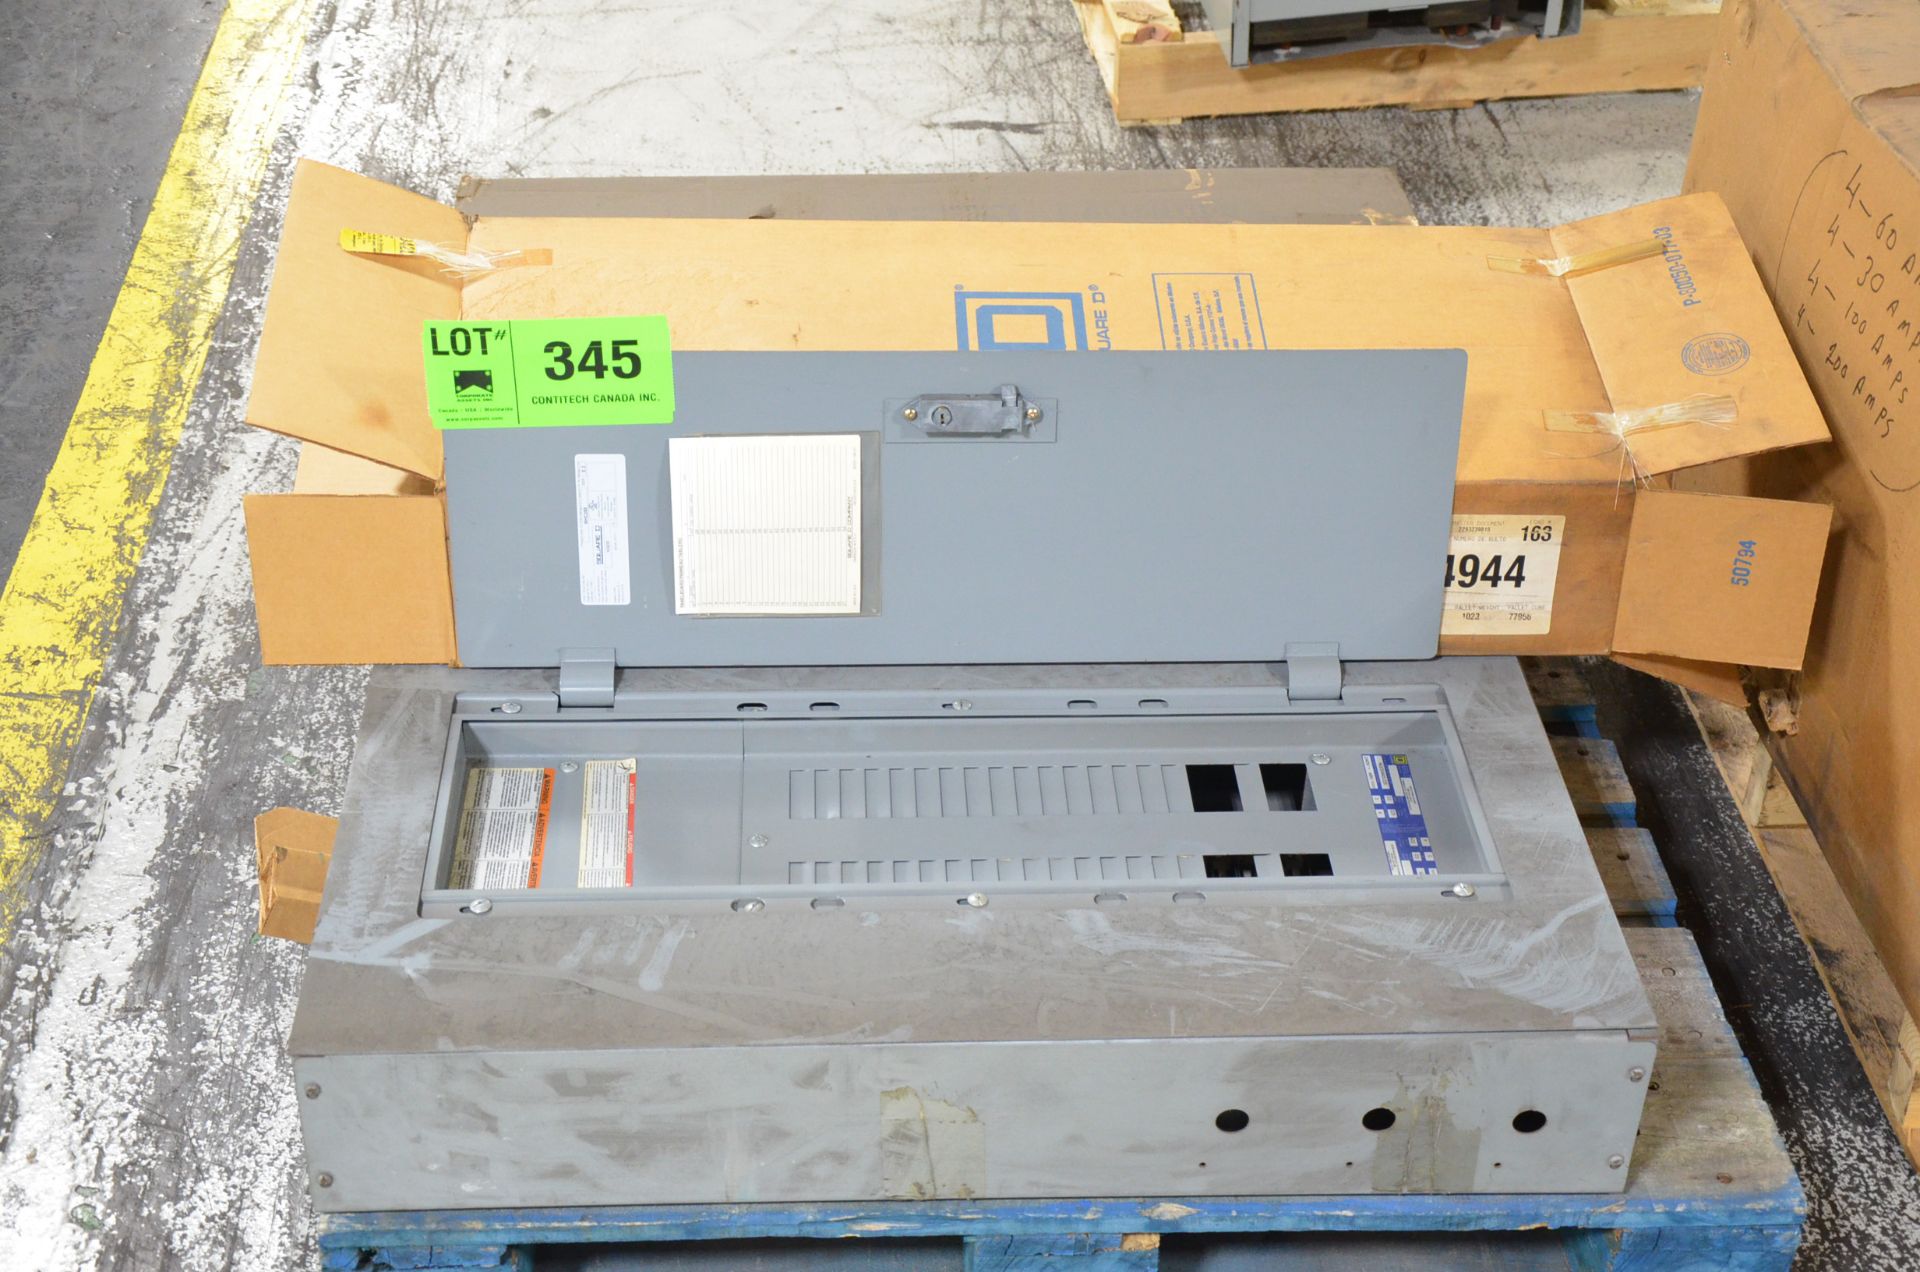 LOT/ SQUARE D ELECTRICAL PANELS [RIGGING FEE FOR LOT #345 - $25 USD PLUS APPLICABLE TAXES]